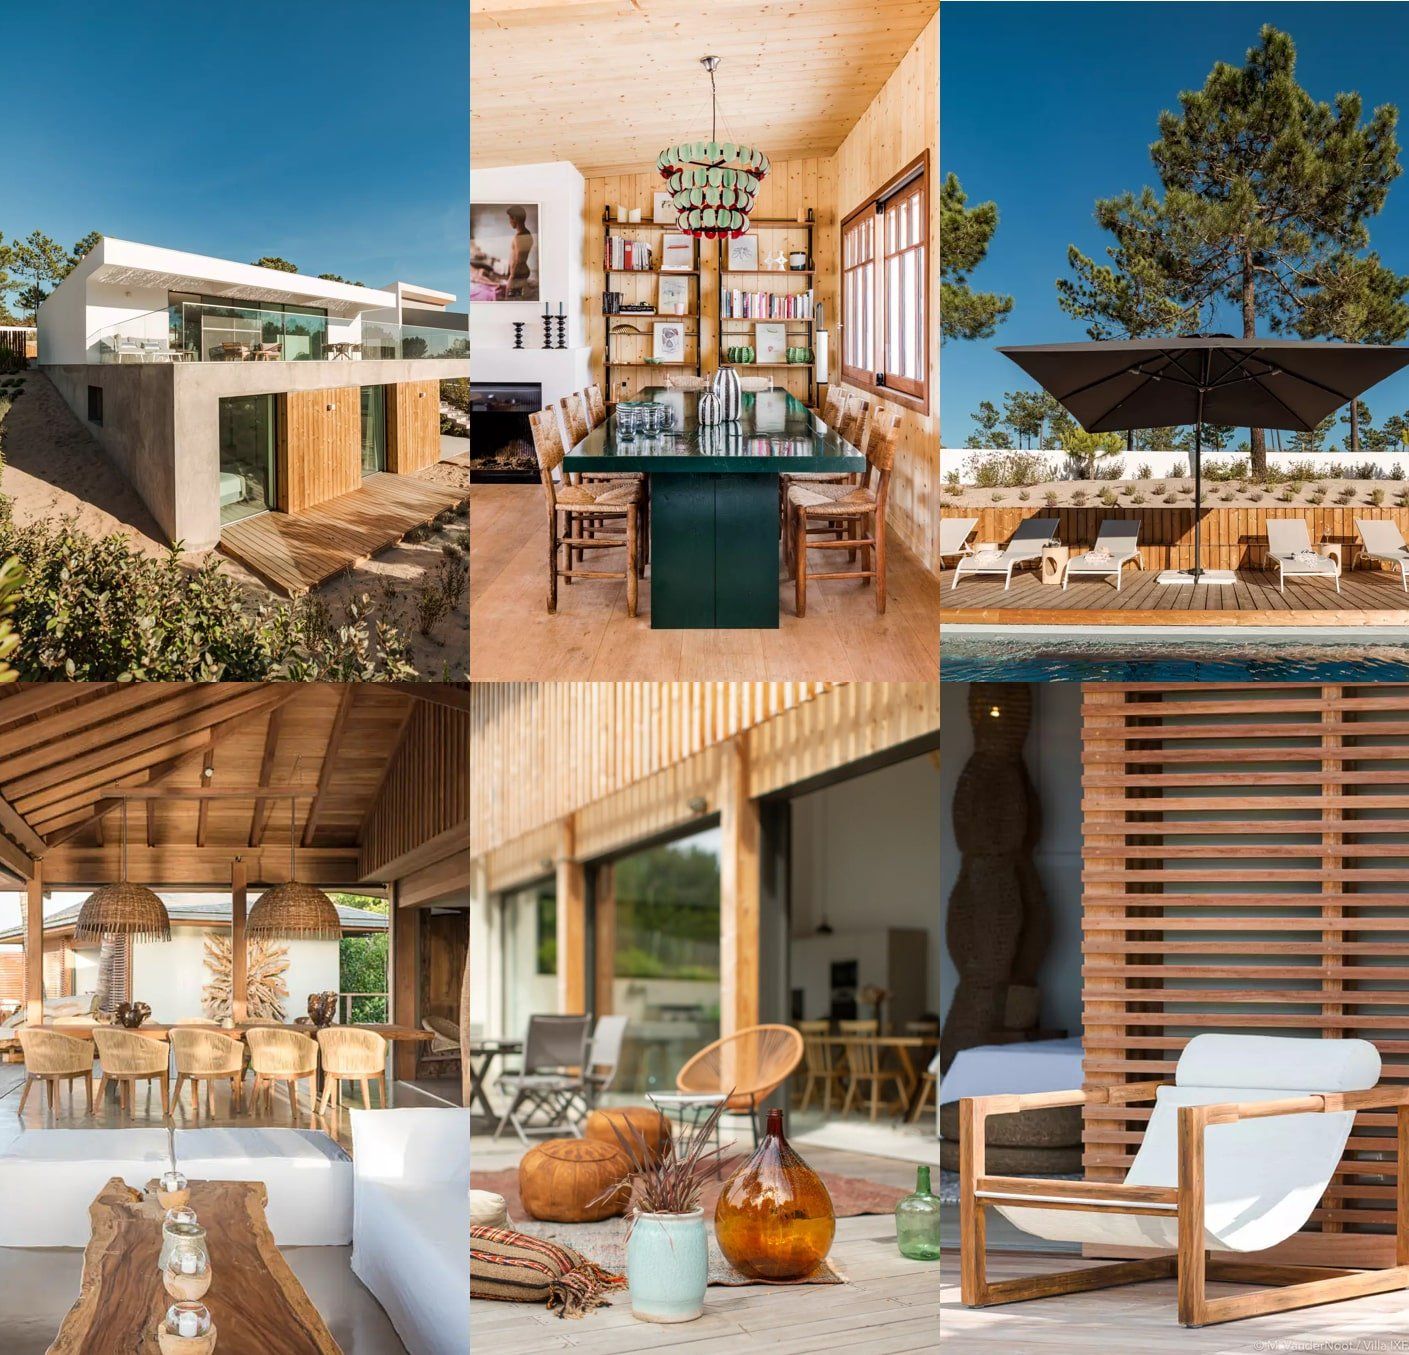 The most beautiful log homes and interiors